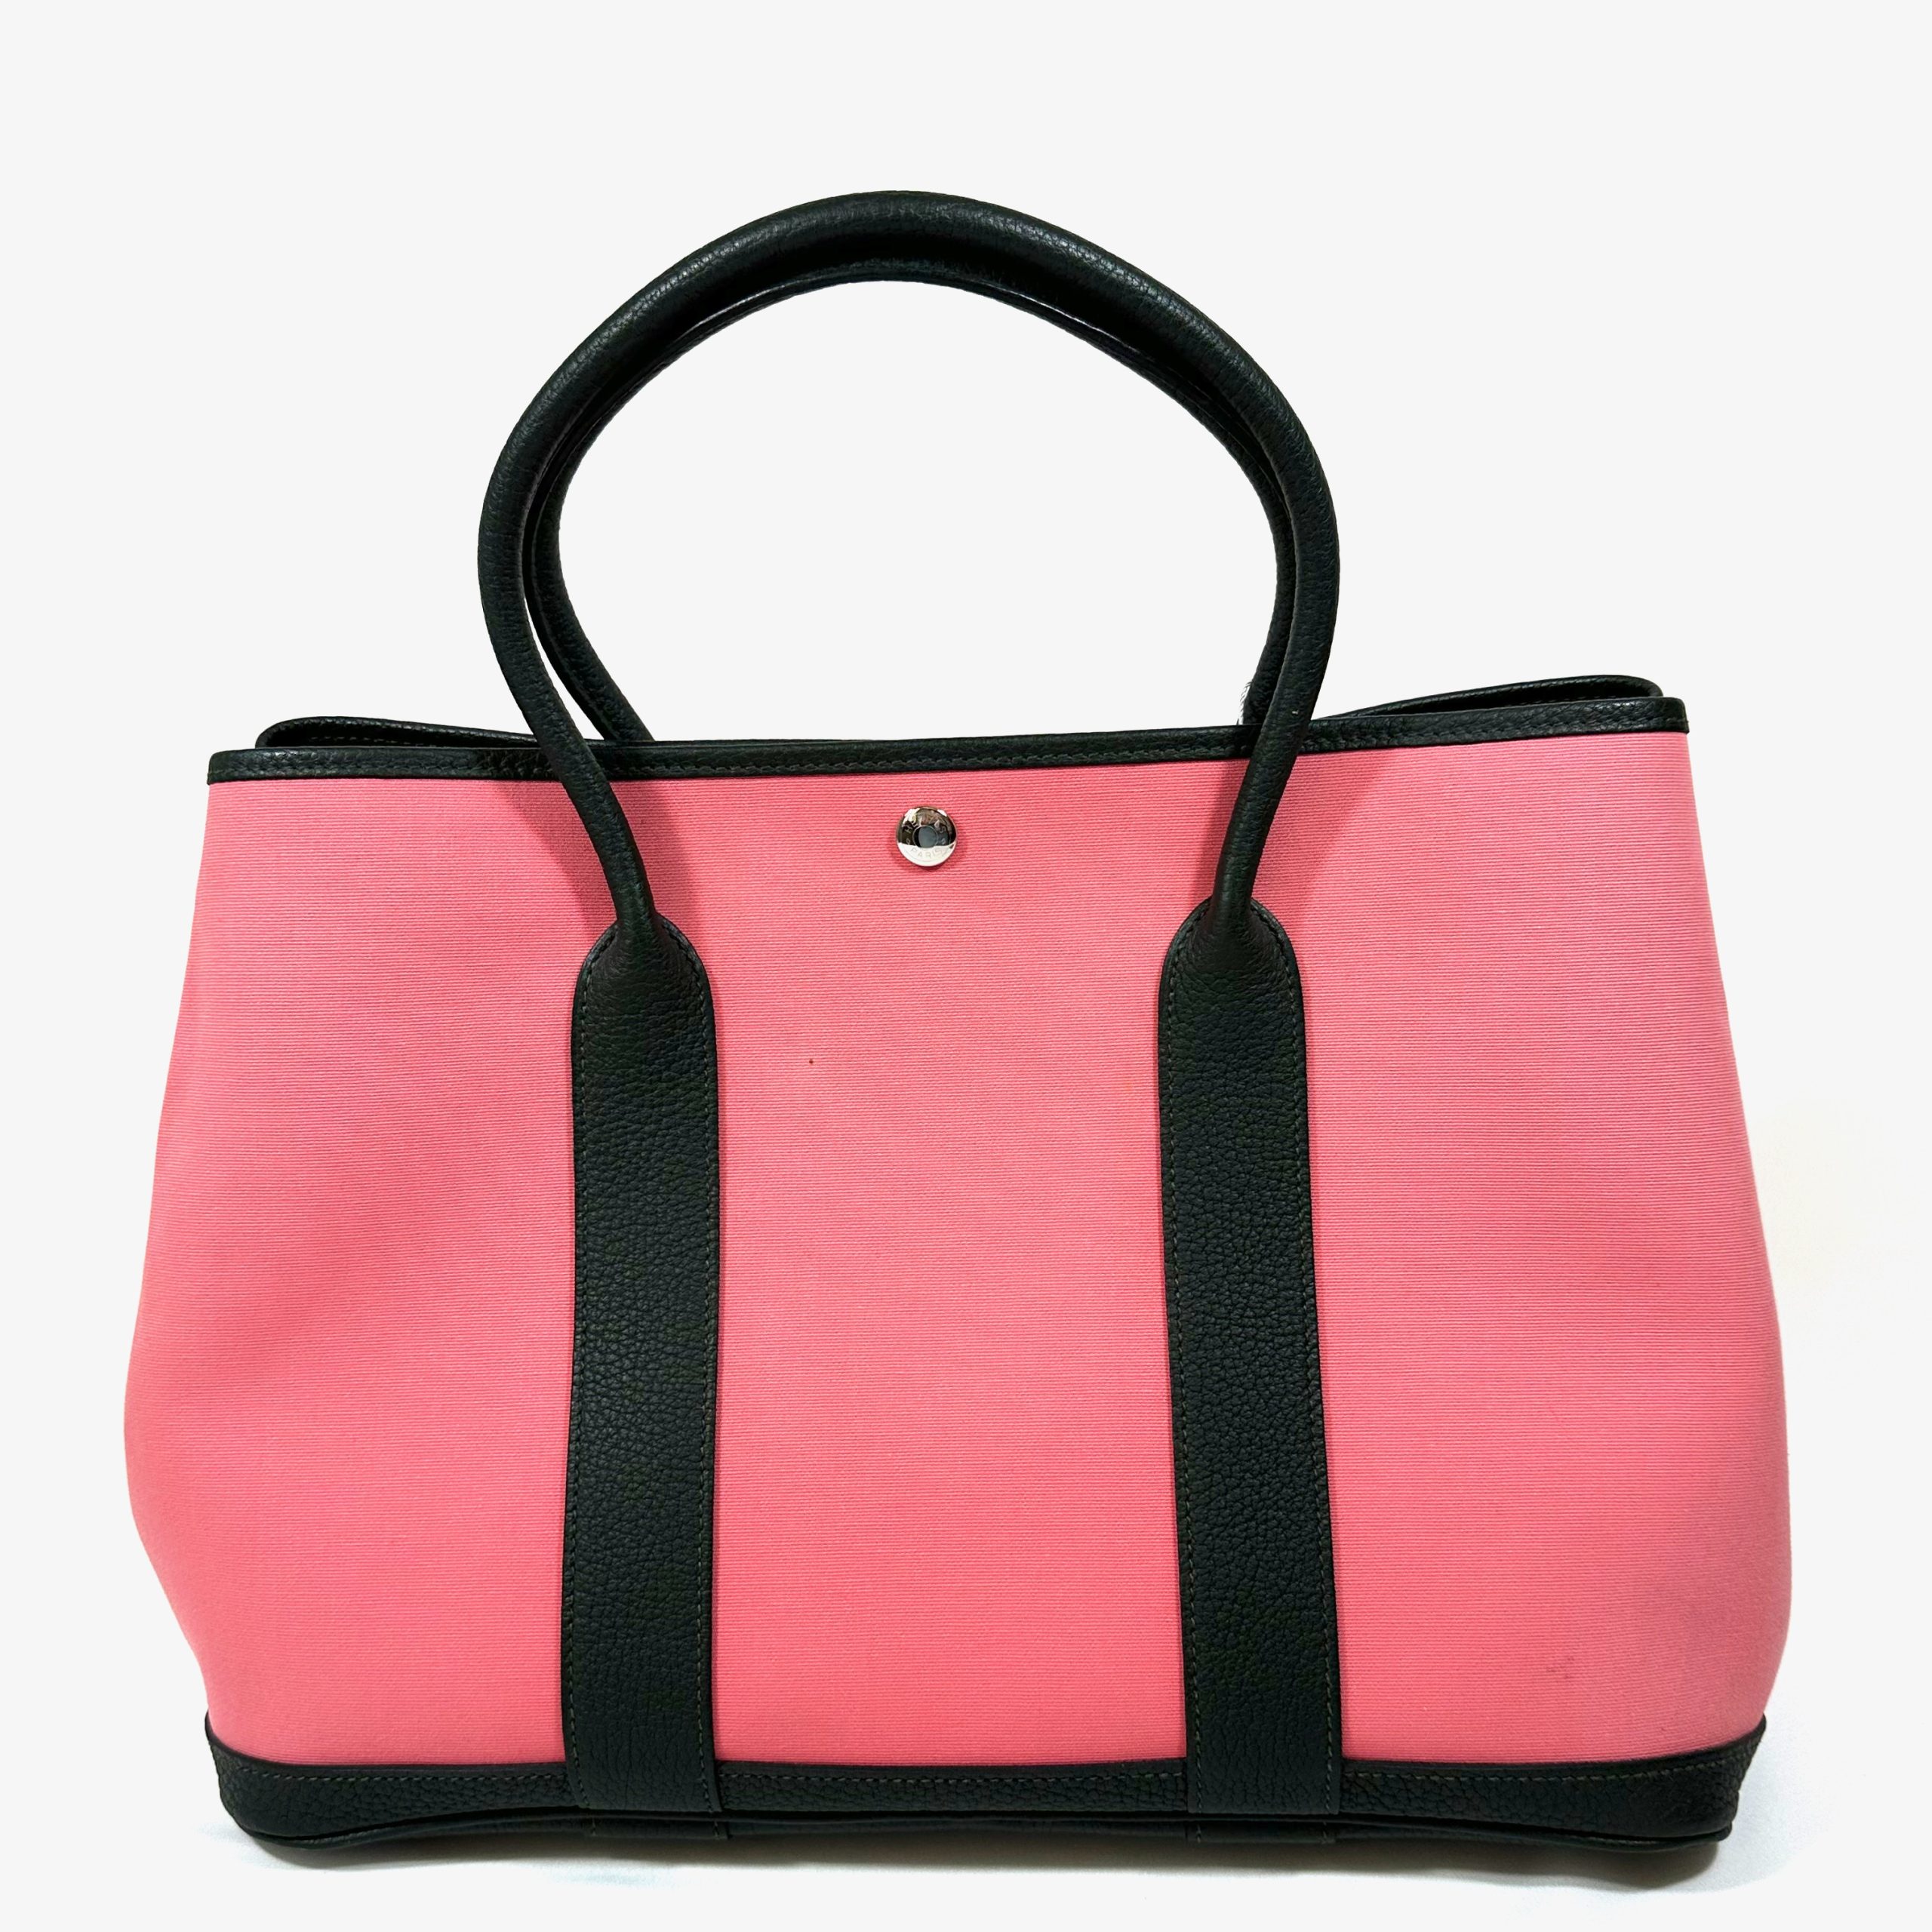 HERMÈS GARDEN PARTY 36 TOTE BAG IN PINK CANVAS & BLACK LEATHER - Still in  fashion